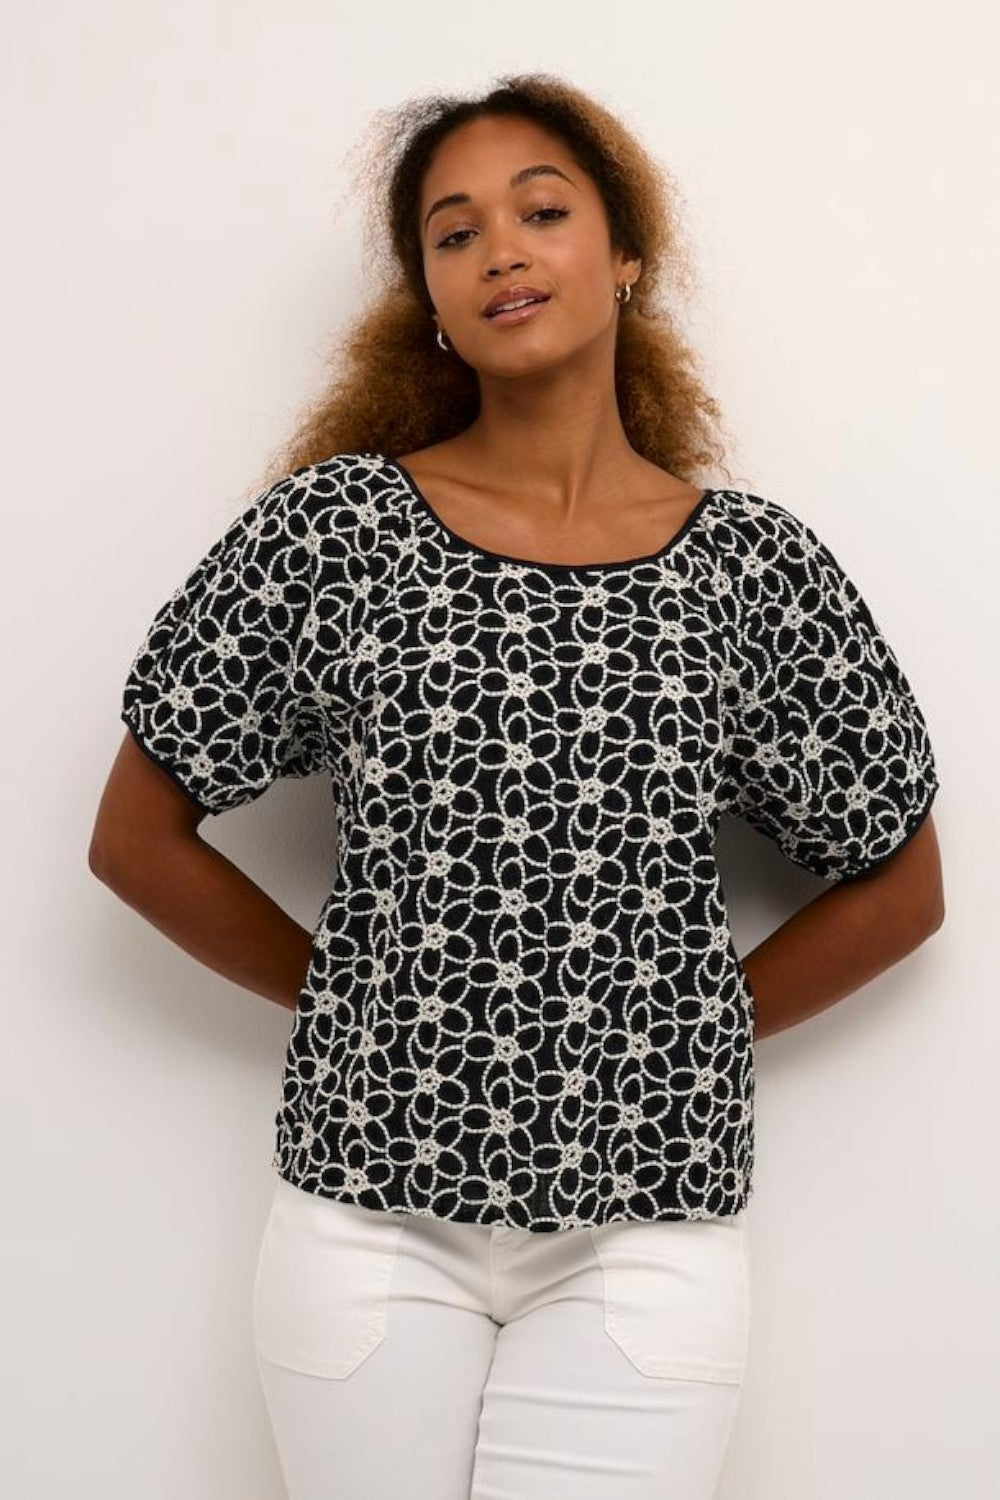 Women's Tops & Blouses – Broderick's Clothing Co.